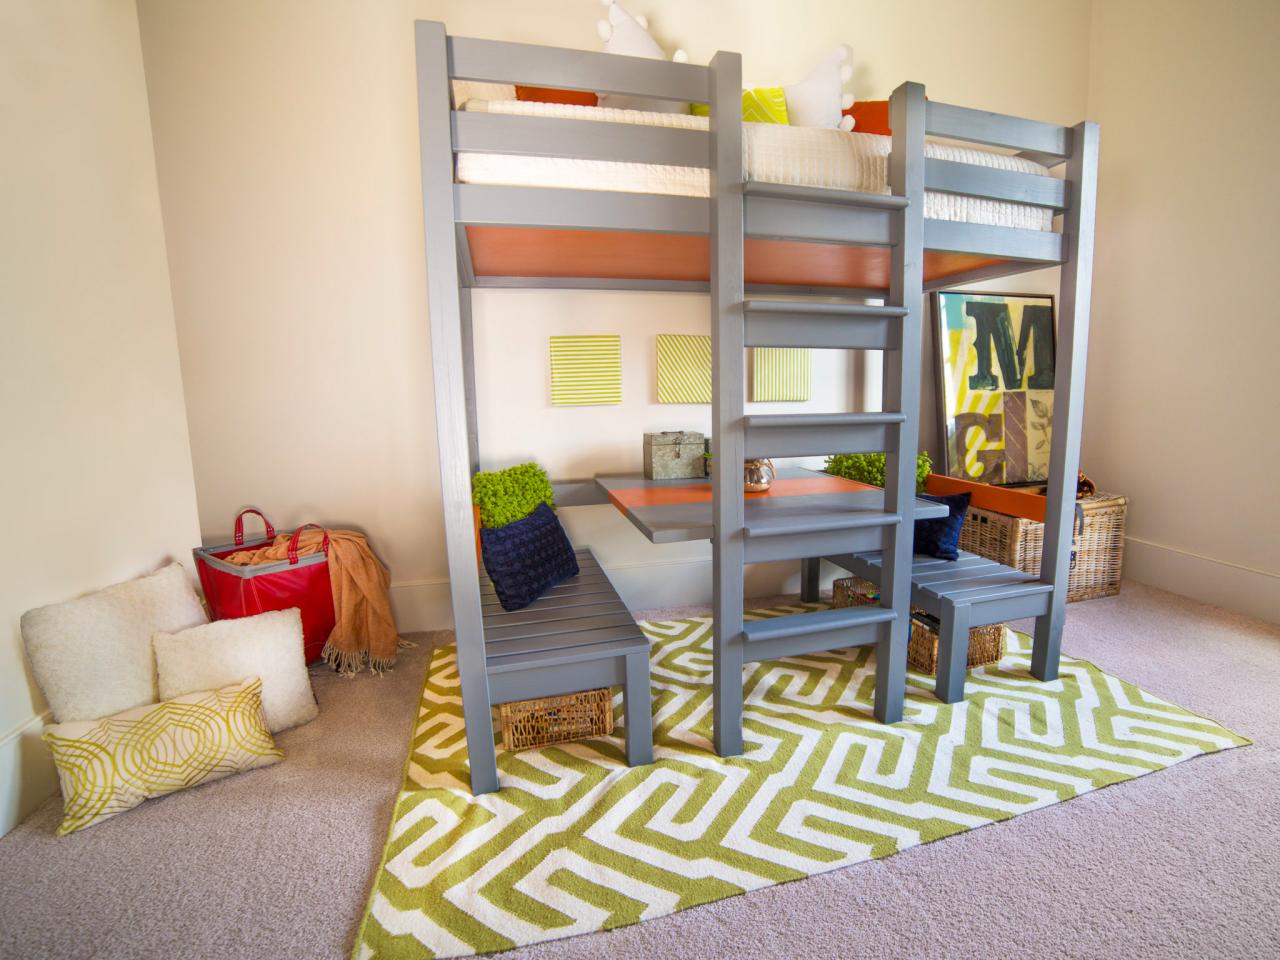 How To Build A Loft Bed With Built In, Dorm Bunk Bed Plans